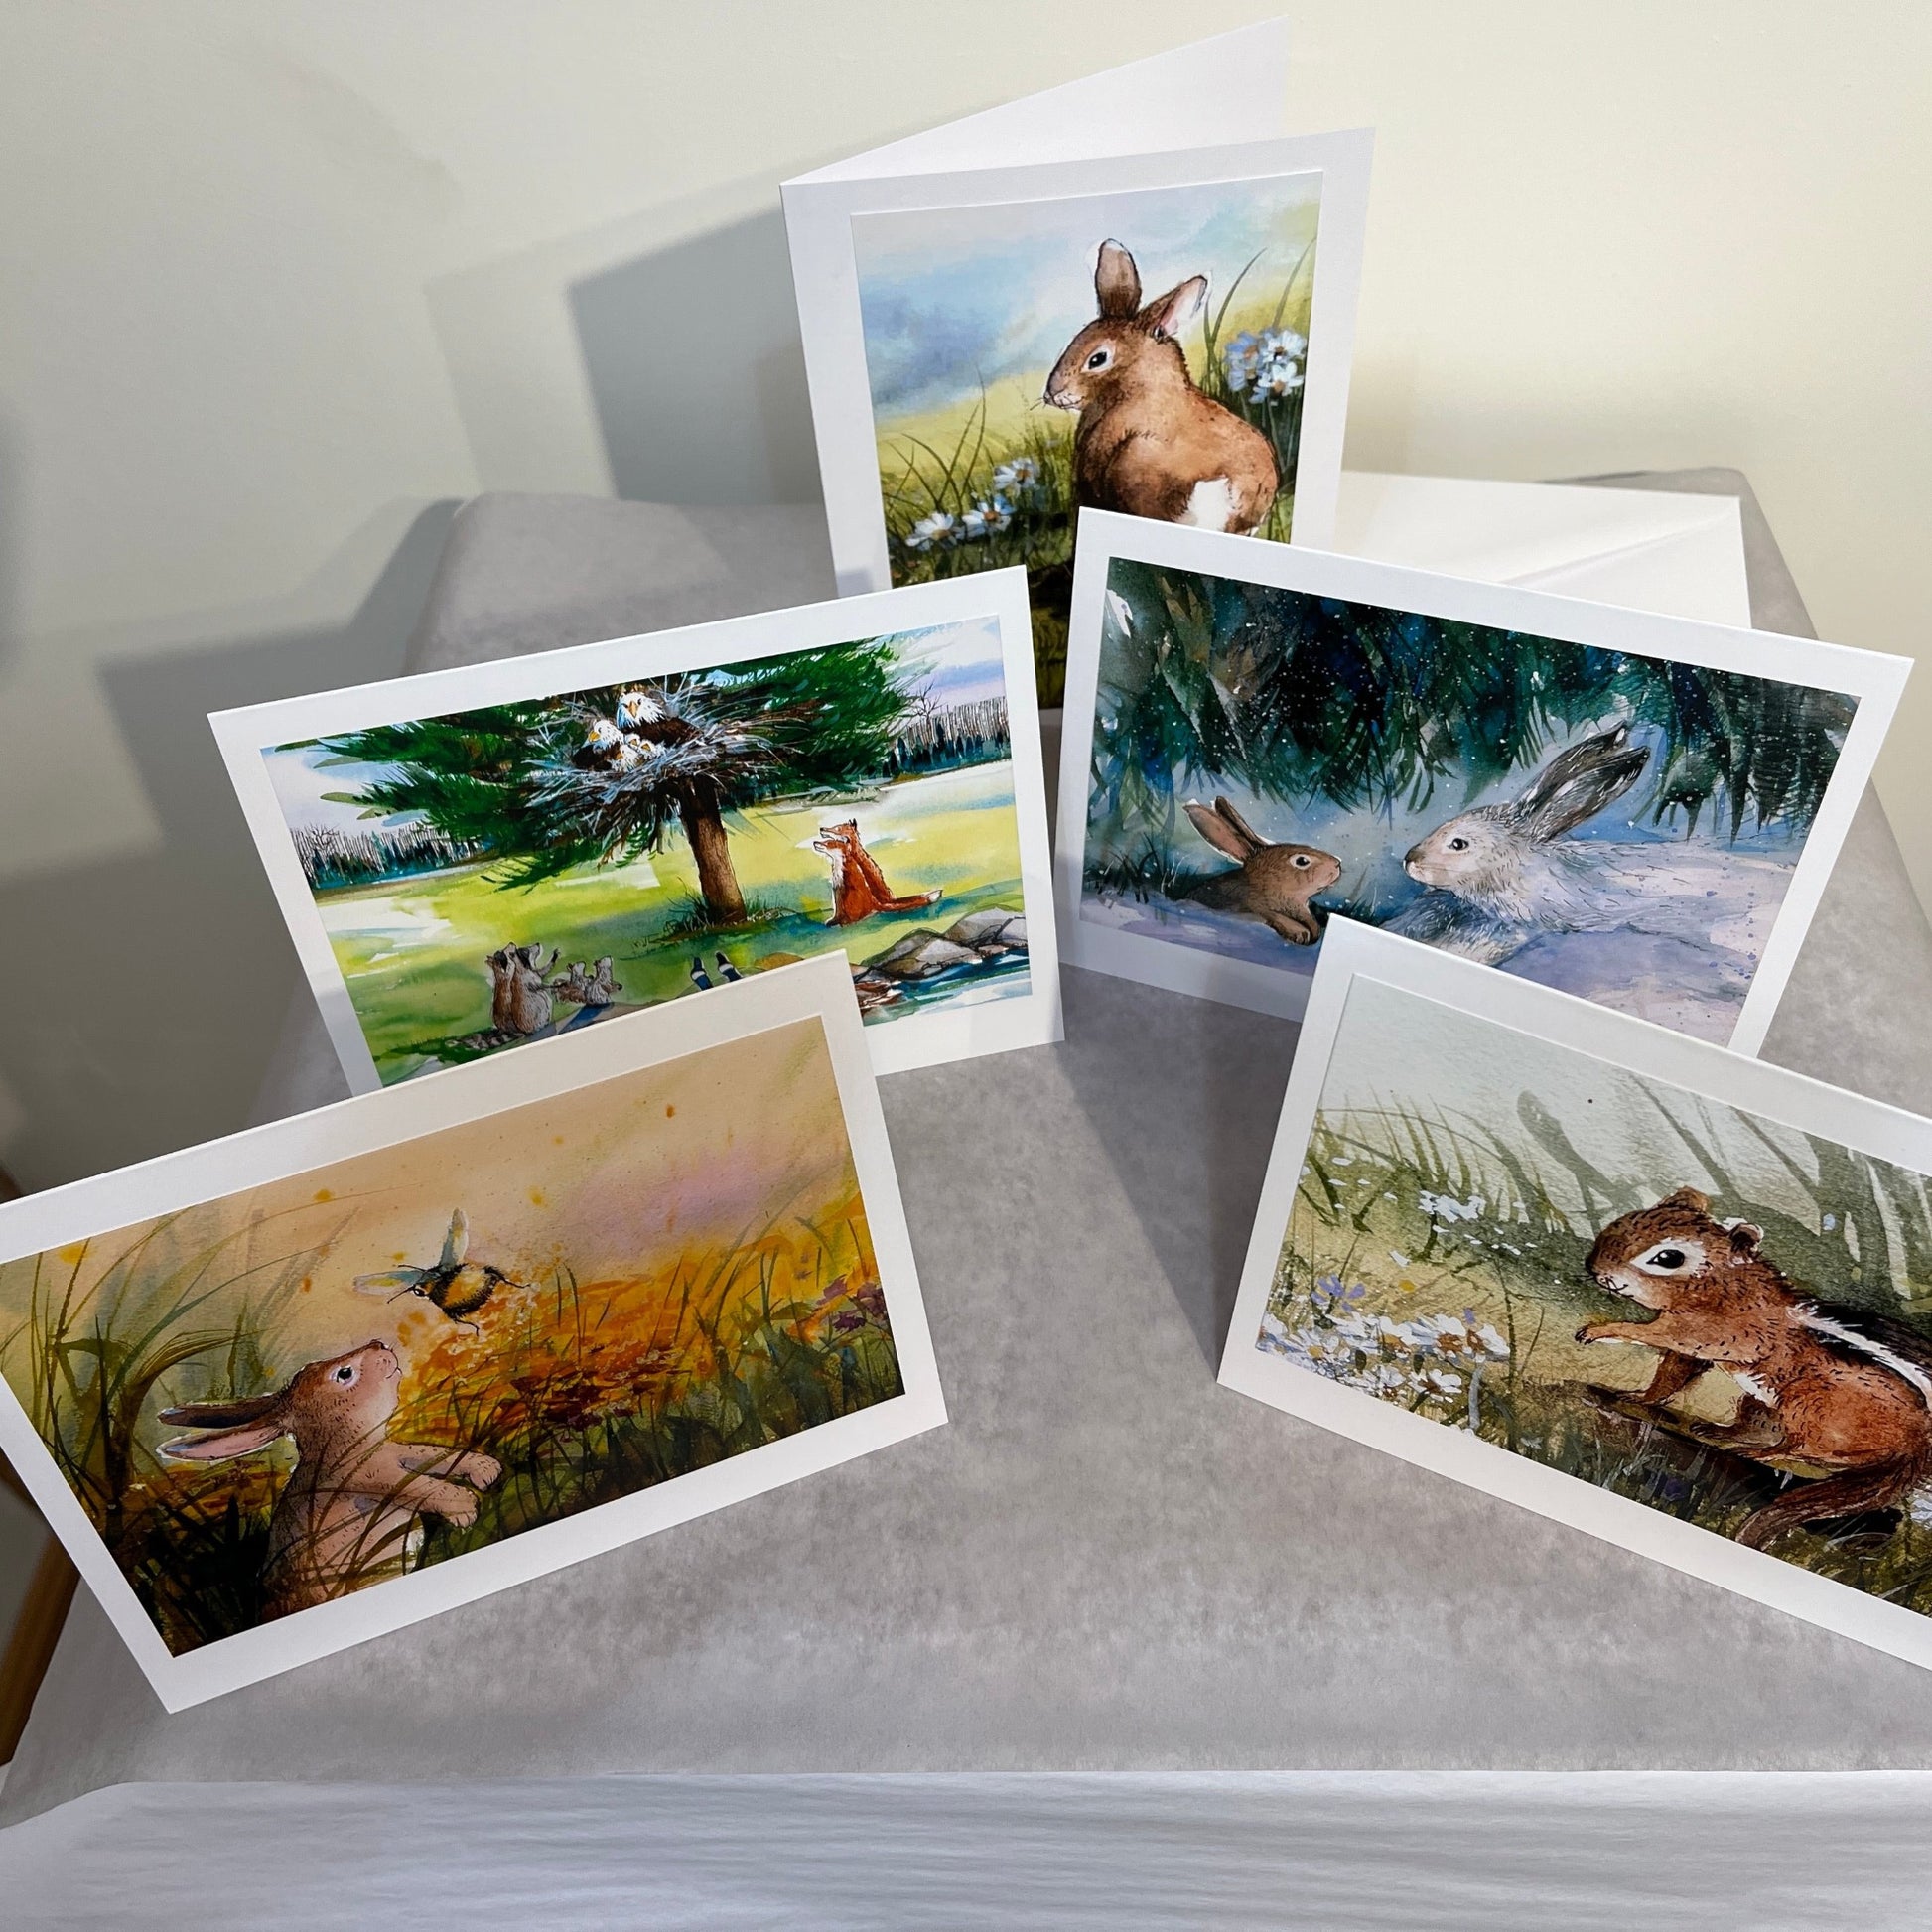 set of 5 photo note cards from Hop Onward Rabbit Rabbit book